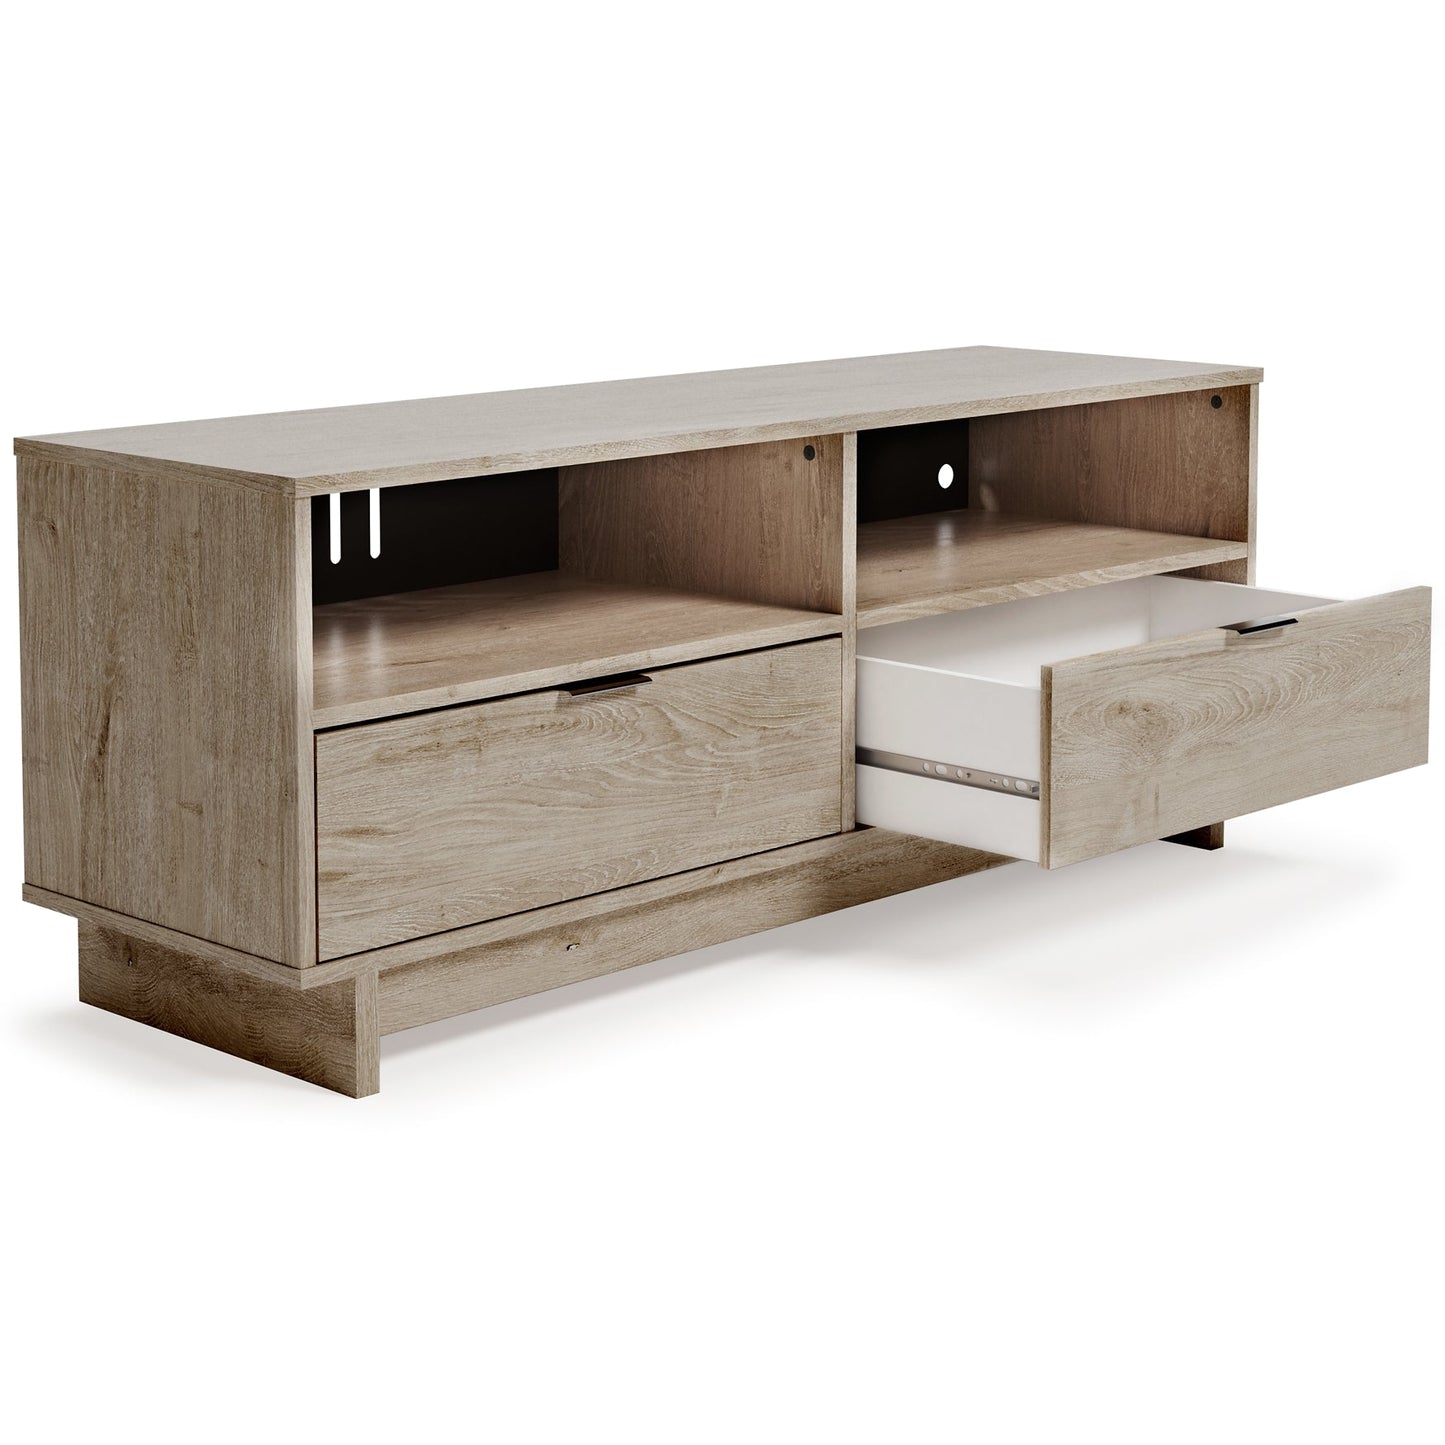 Oliah Medium TV Stand Rent Wise Rent To Own Jacksonville, Florida